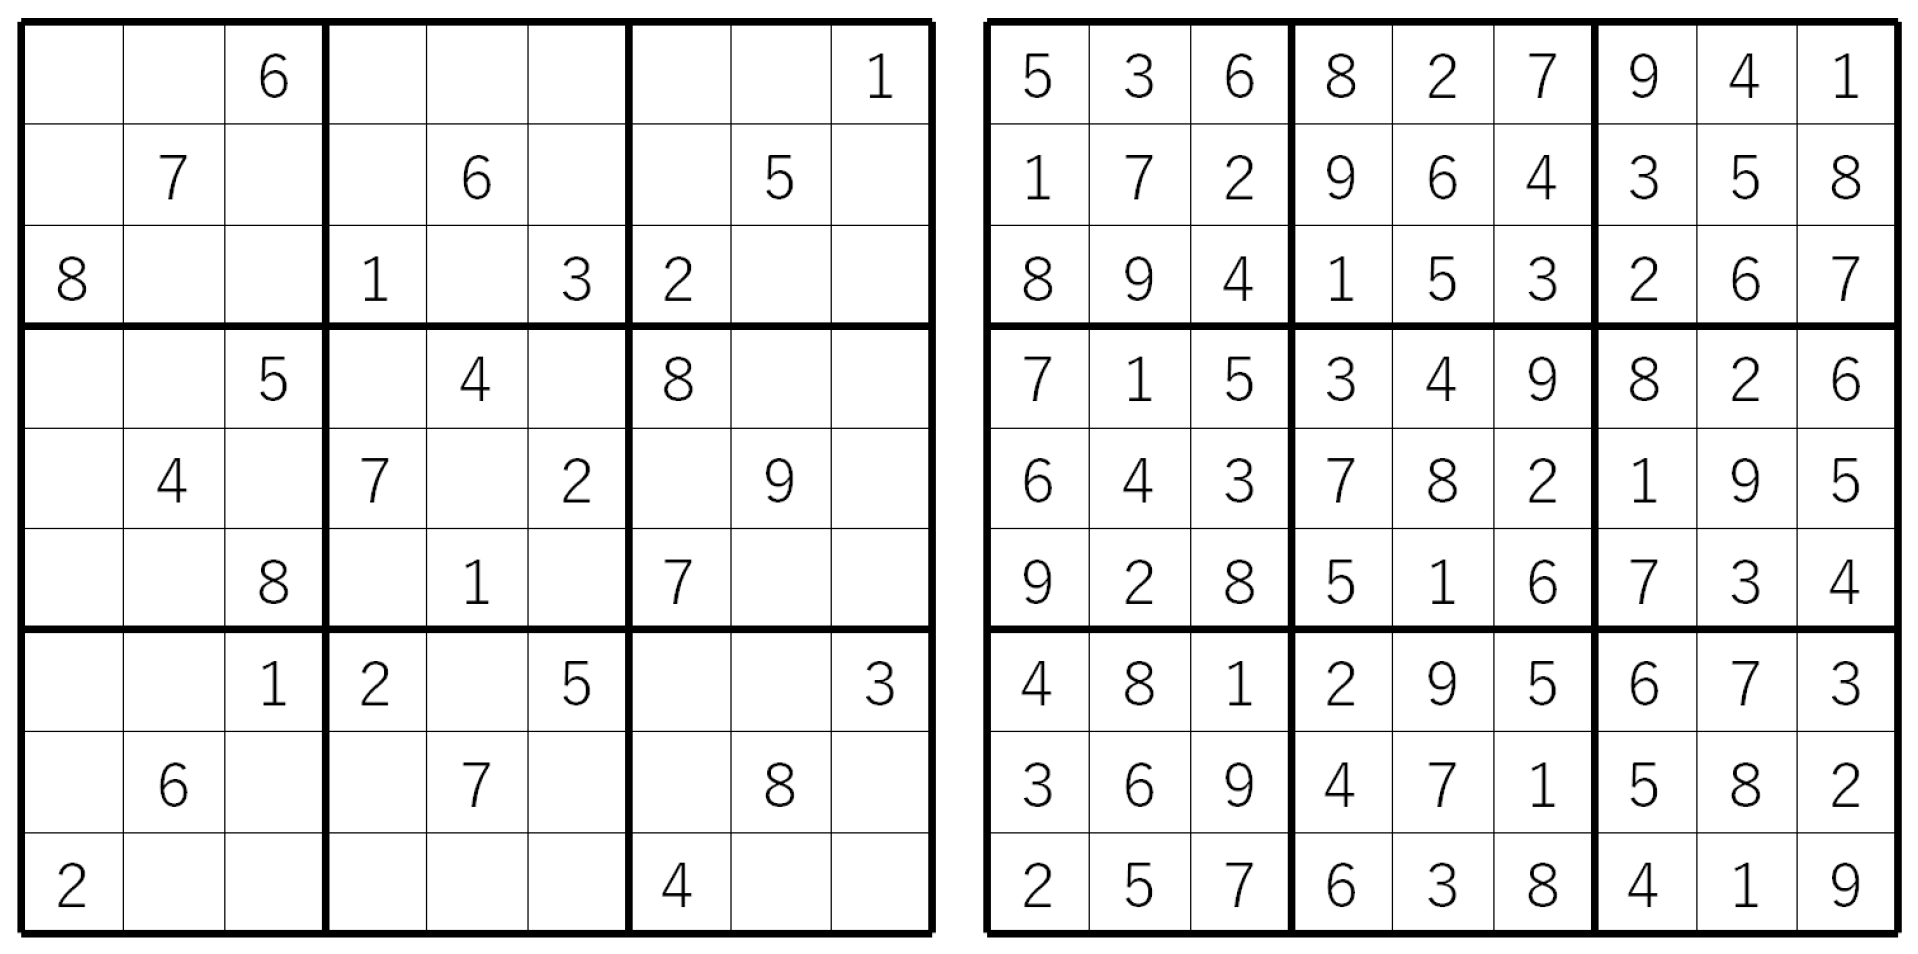 How to Make a Machine Learning and Computer Vision Based Sudoku